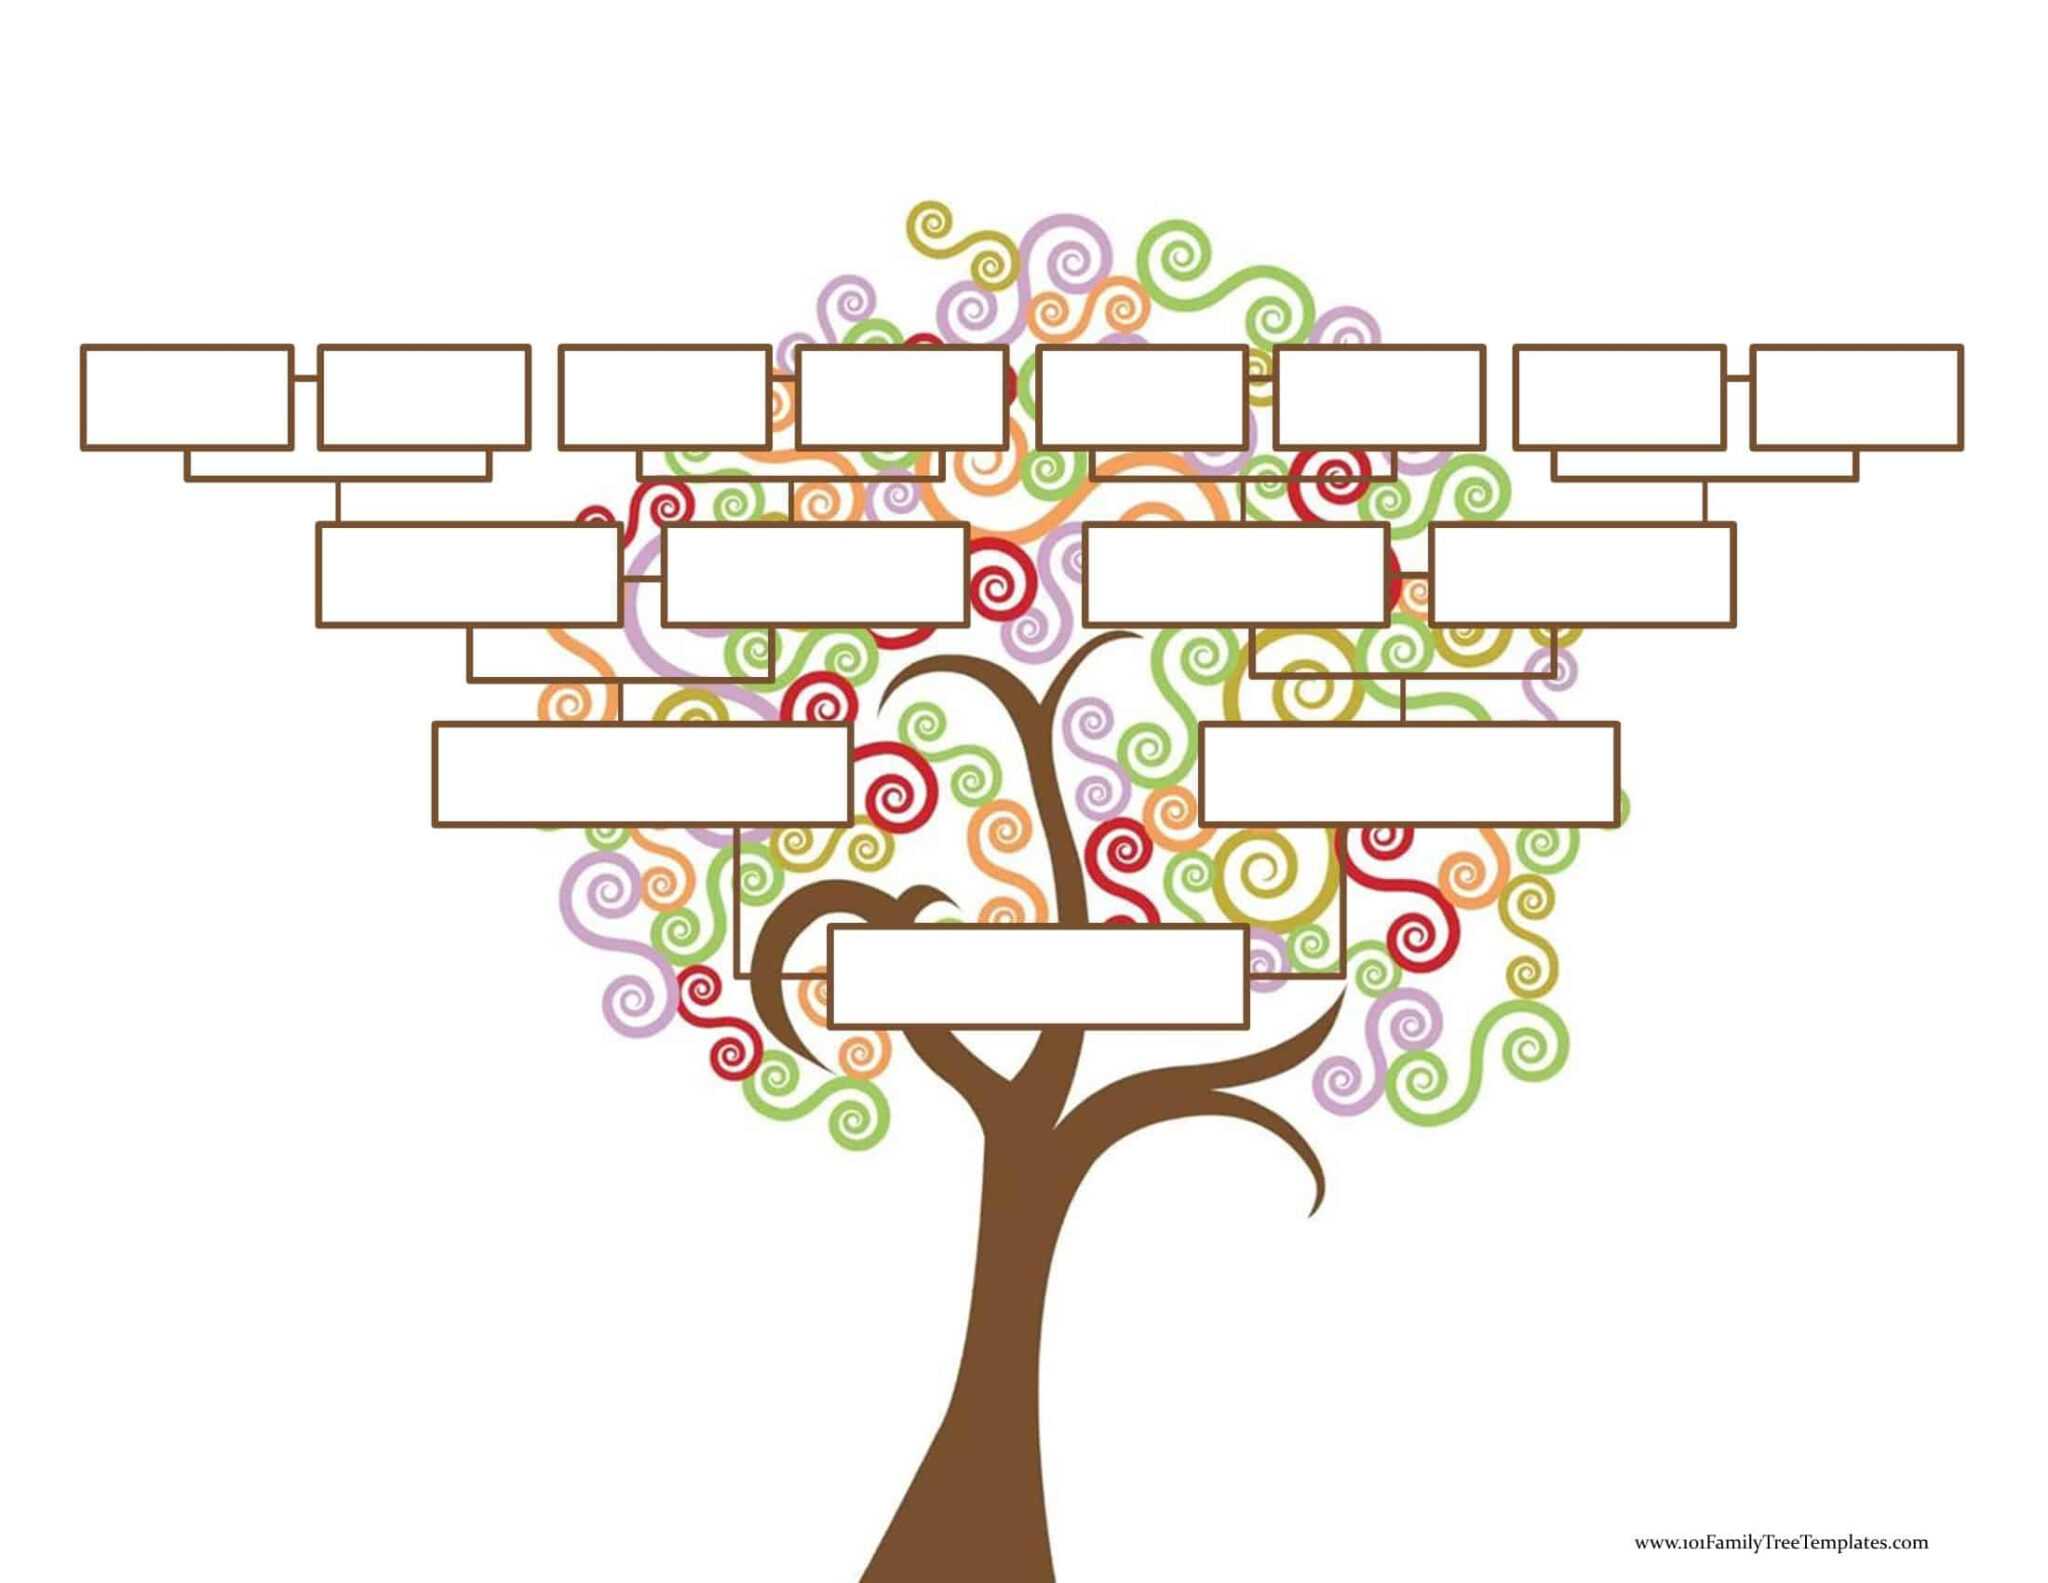 blank-family-tree-template-free-instant-download-within-fill-in-the